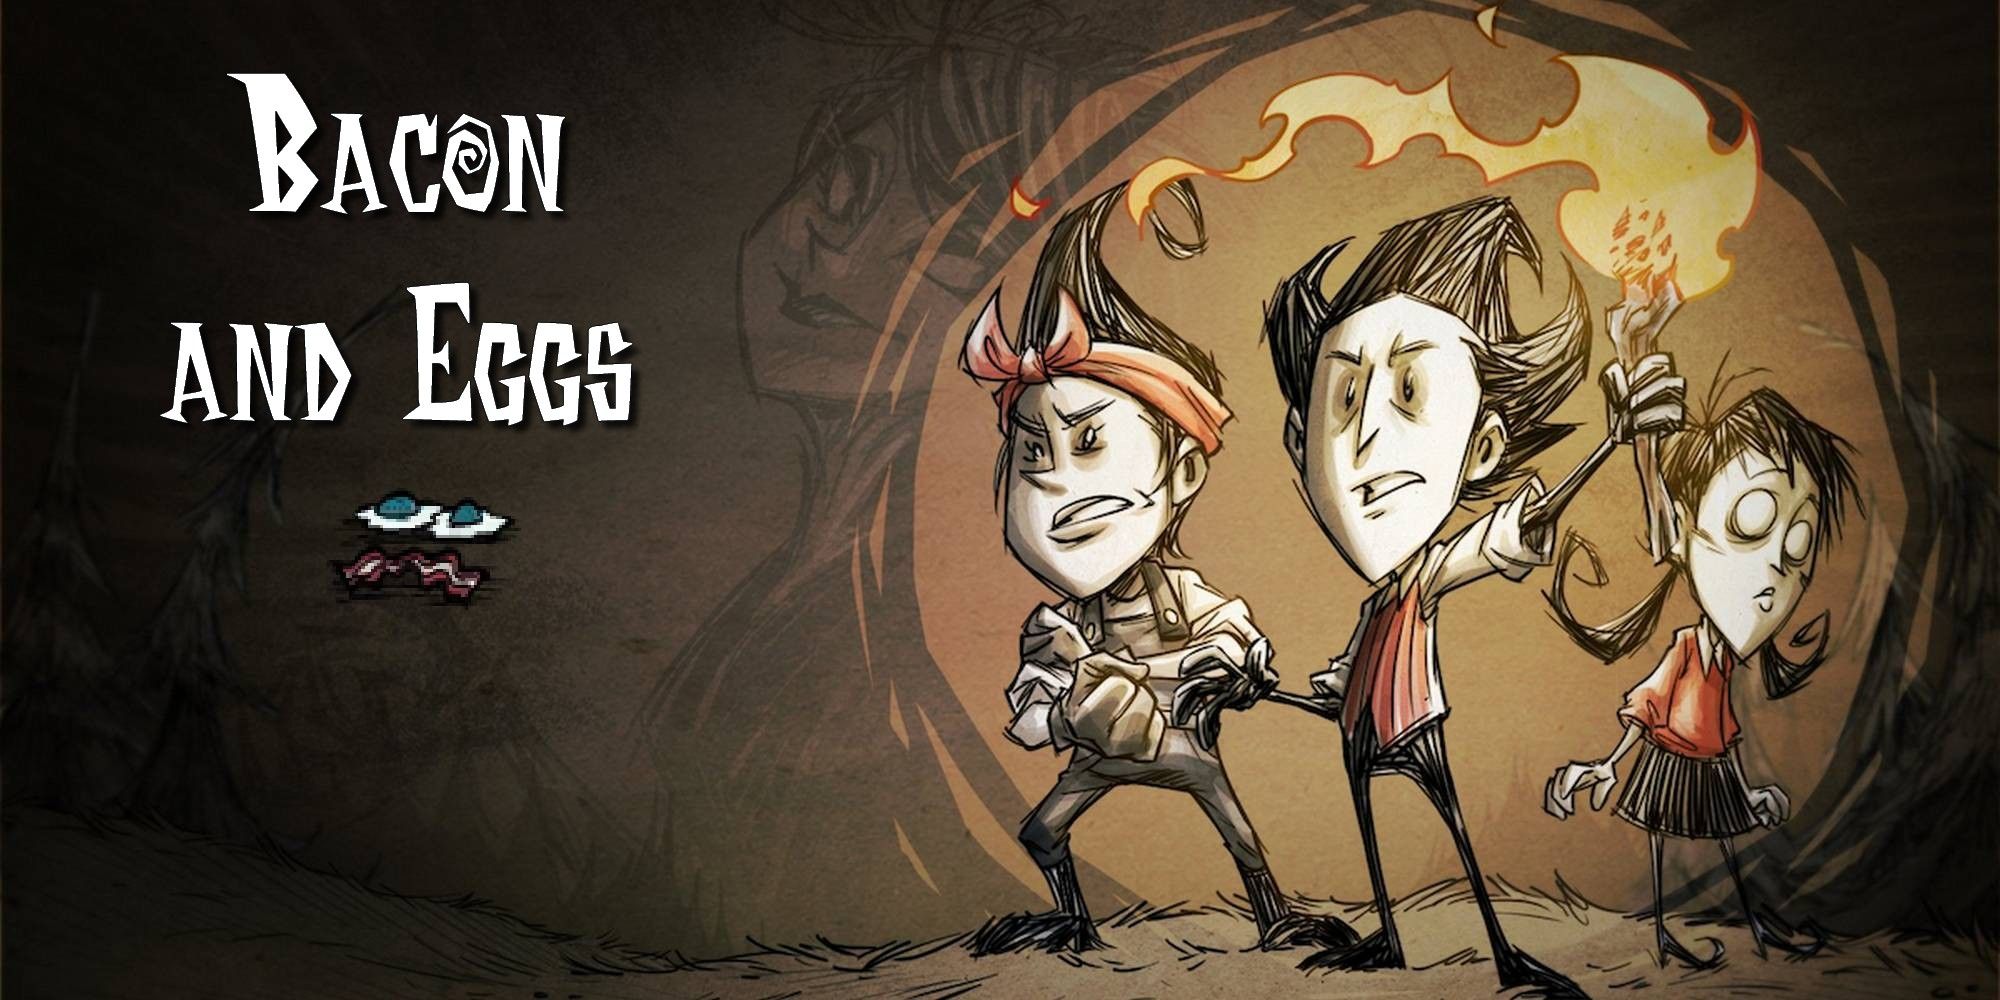 wilson willow don't starve together best recipes dst bacon and eggs